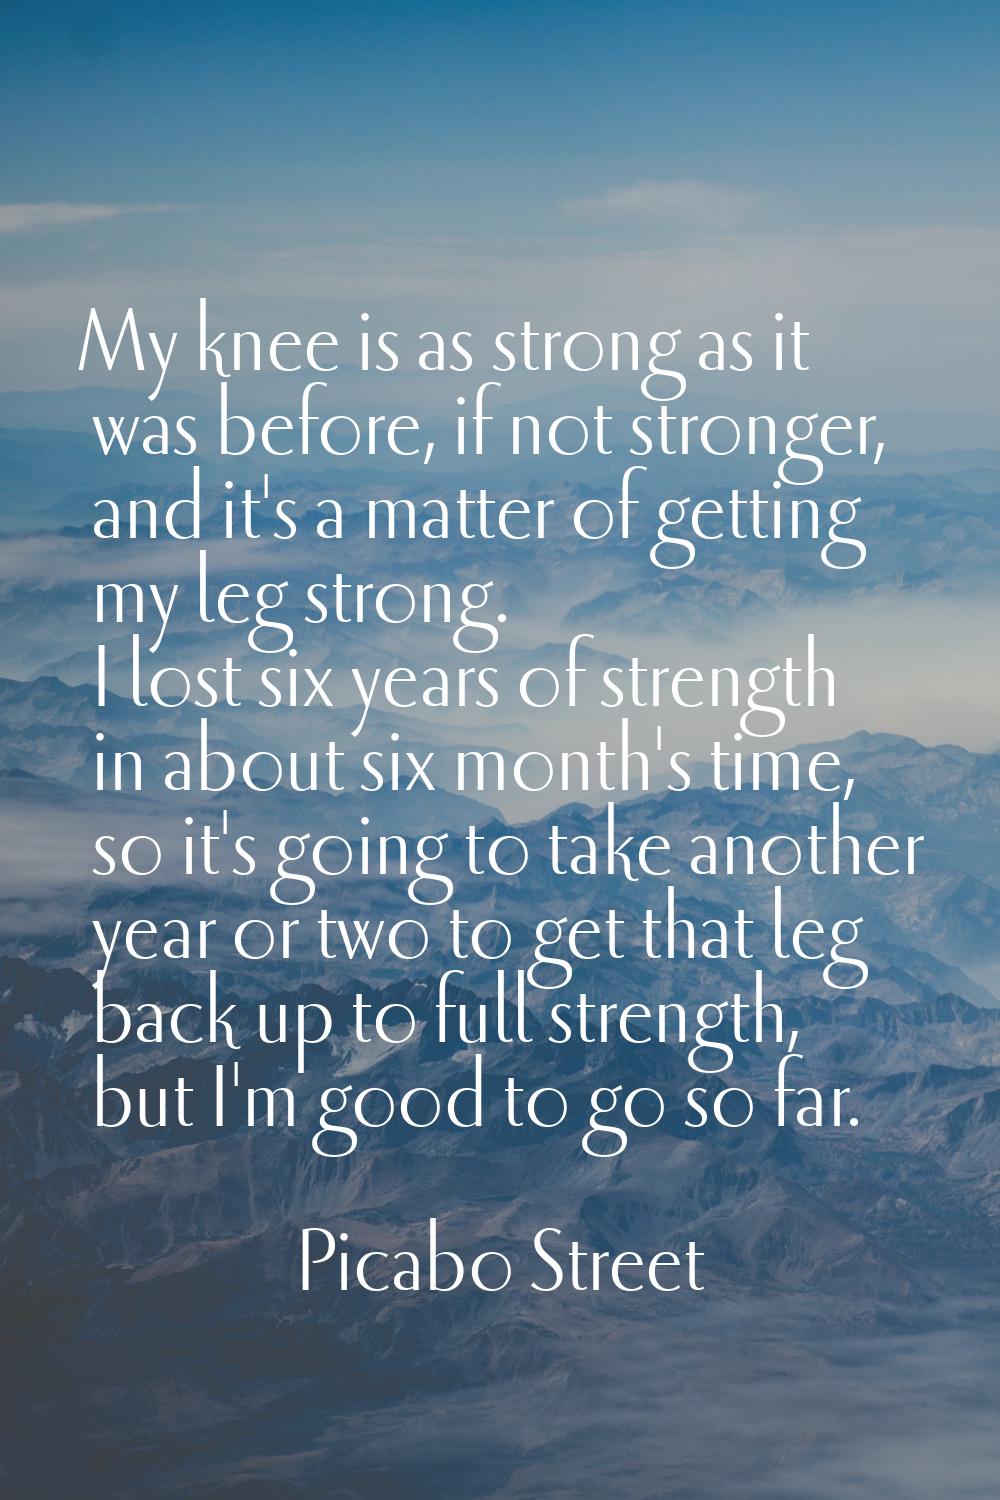 My knee is as strong as it was before, if not stronger, and it's a matter of getting my leg strong.